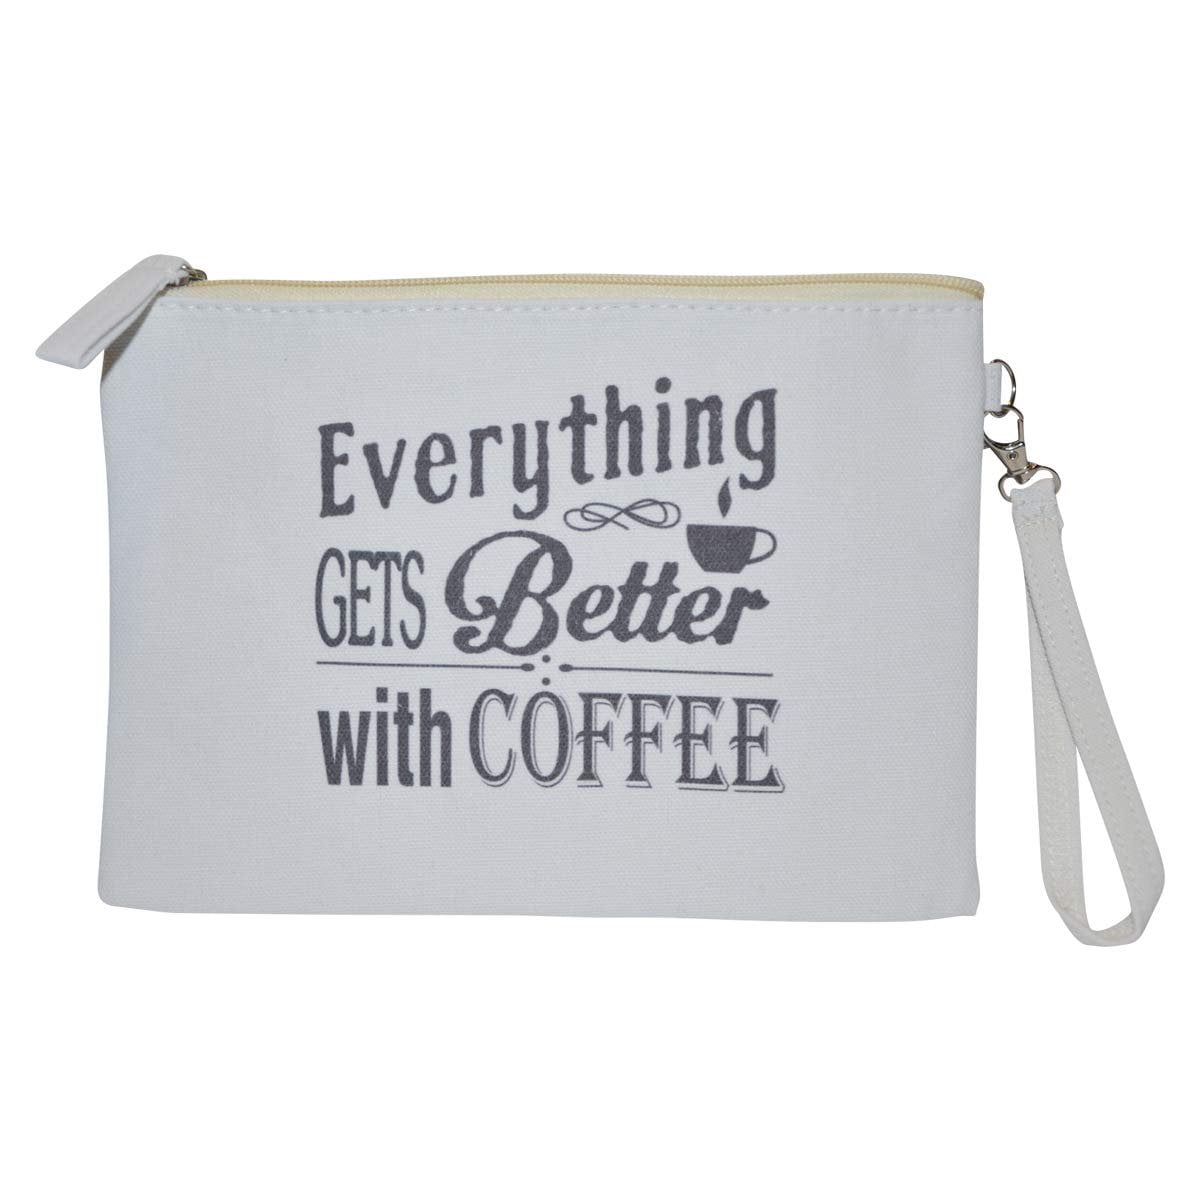 Cosmetic Bag with Sayings - Womens Gift Makeup Bags with Quotes - Large Funny  Makeup Bags - Cute Storage Bag for Travel Everything Gets Better with  Coffee 